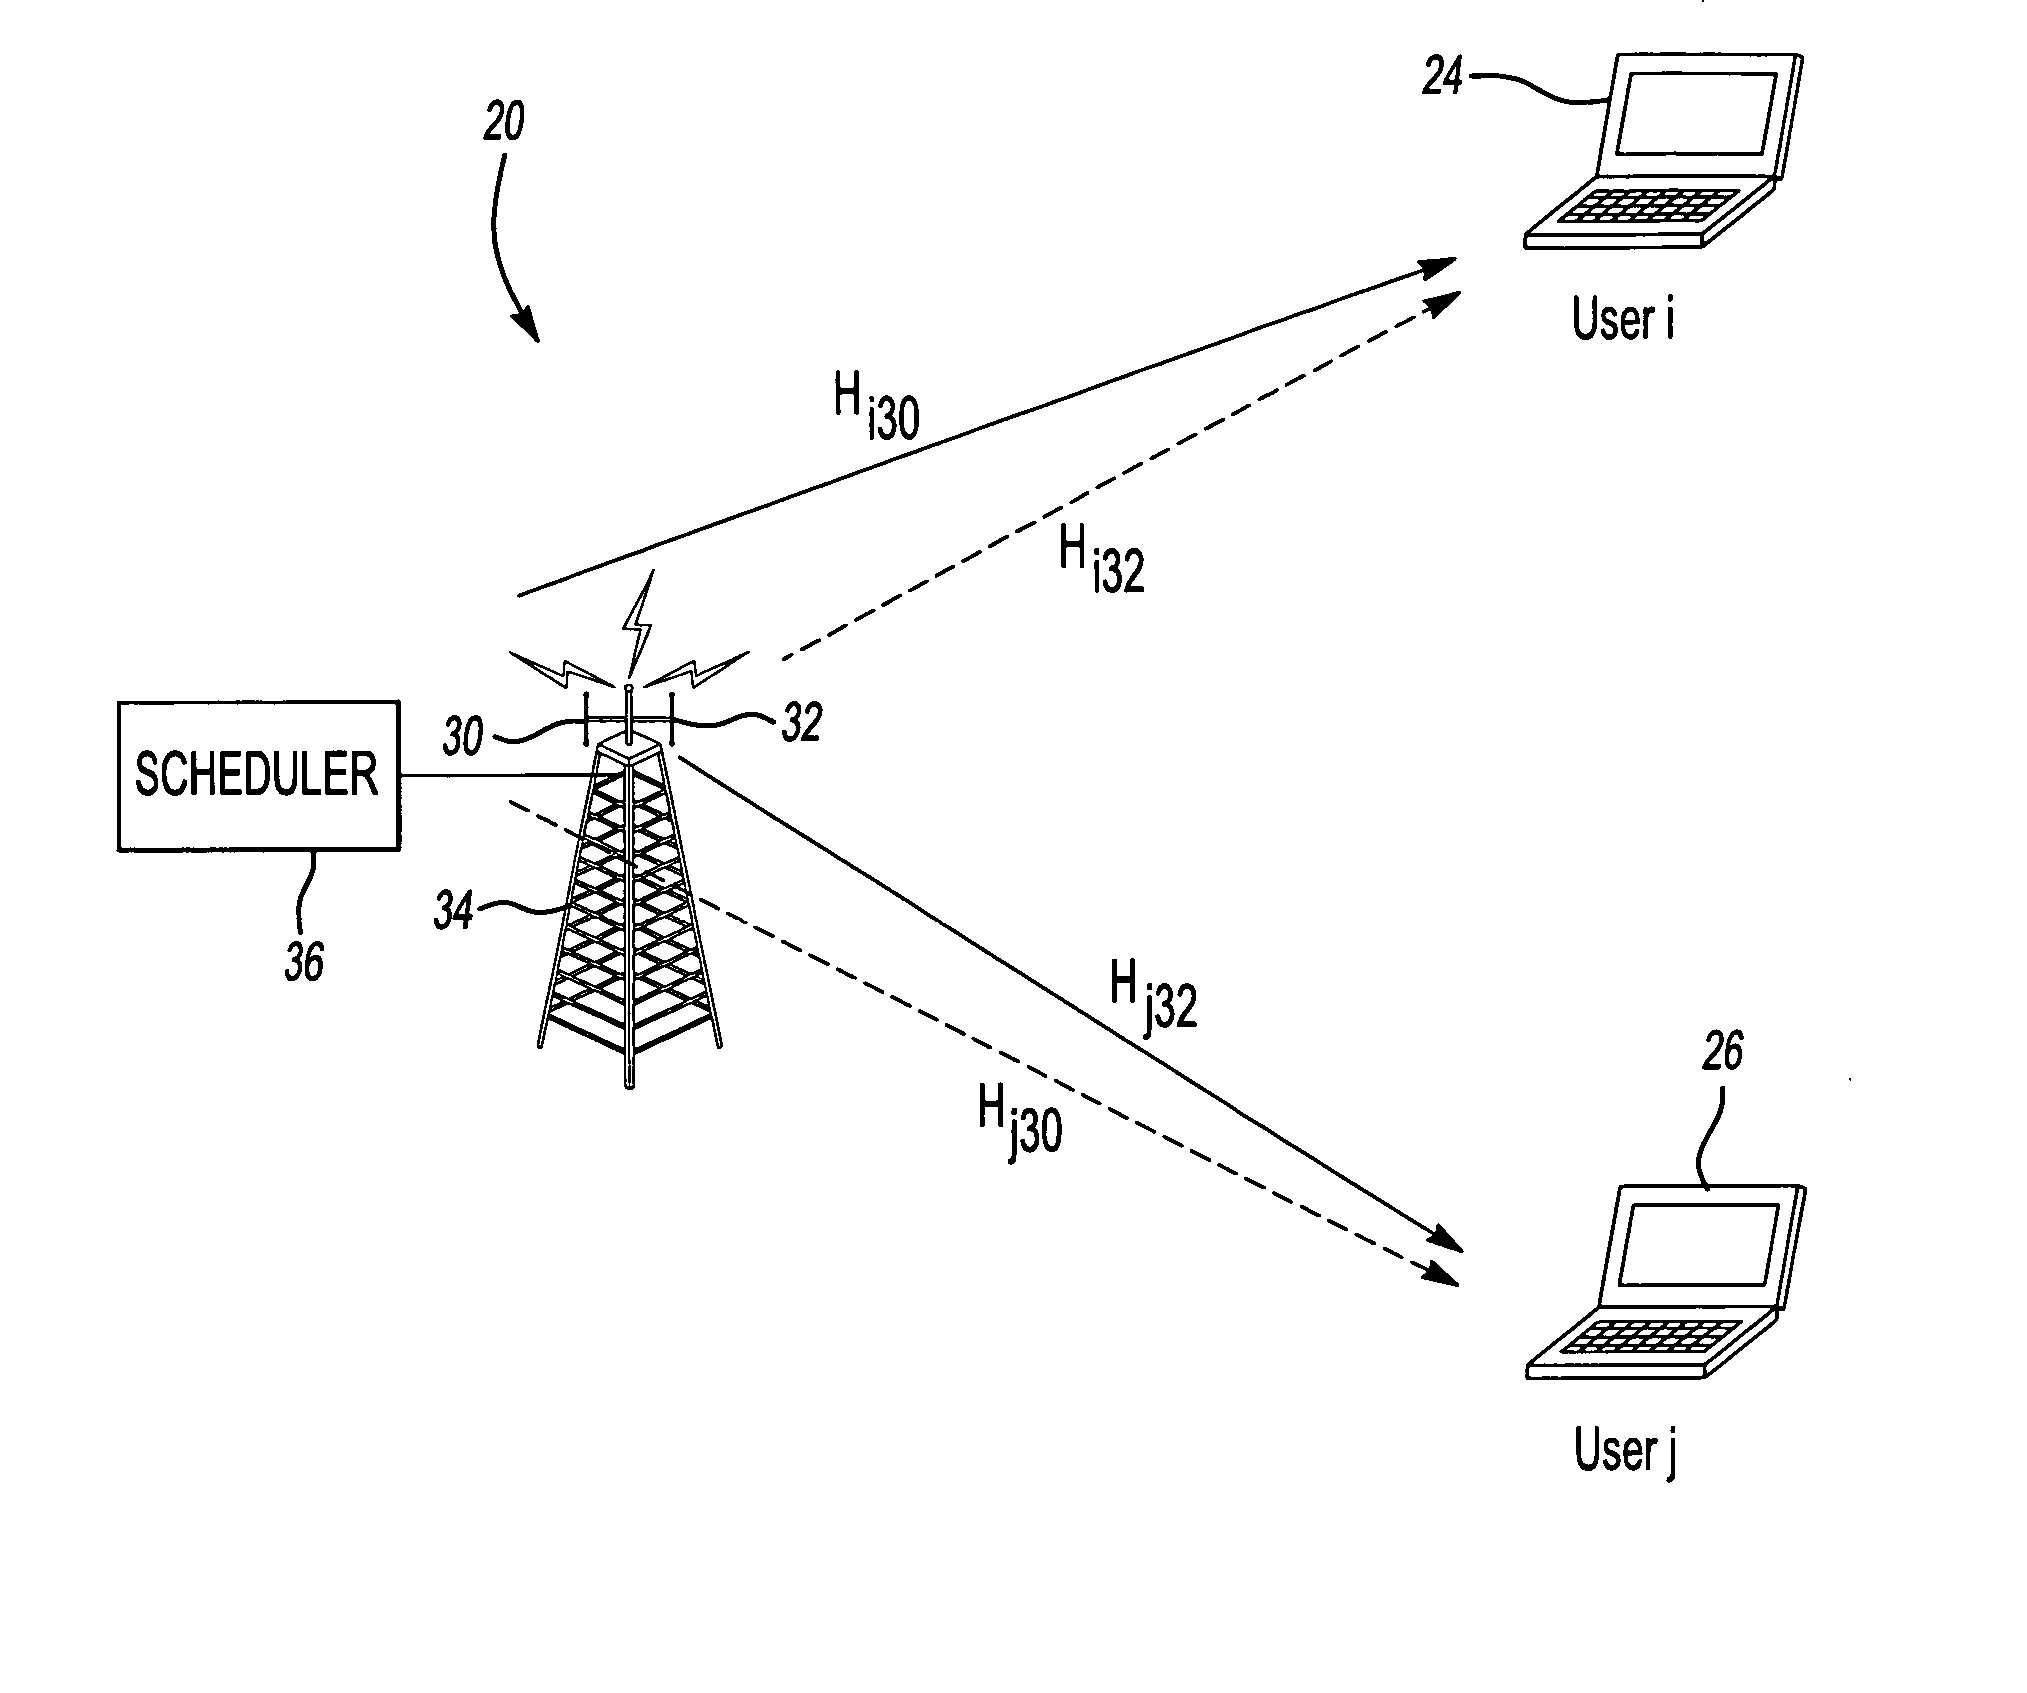 Distributed multiple antenna scheduling for wireless packet data communication system using OFDM